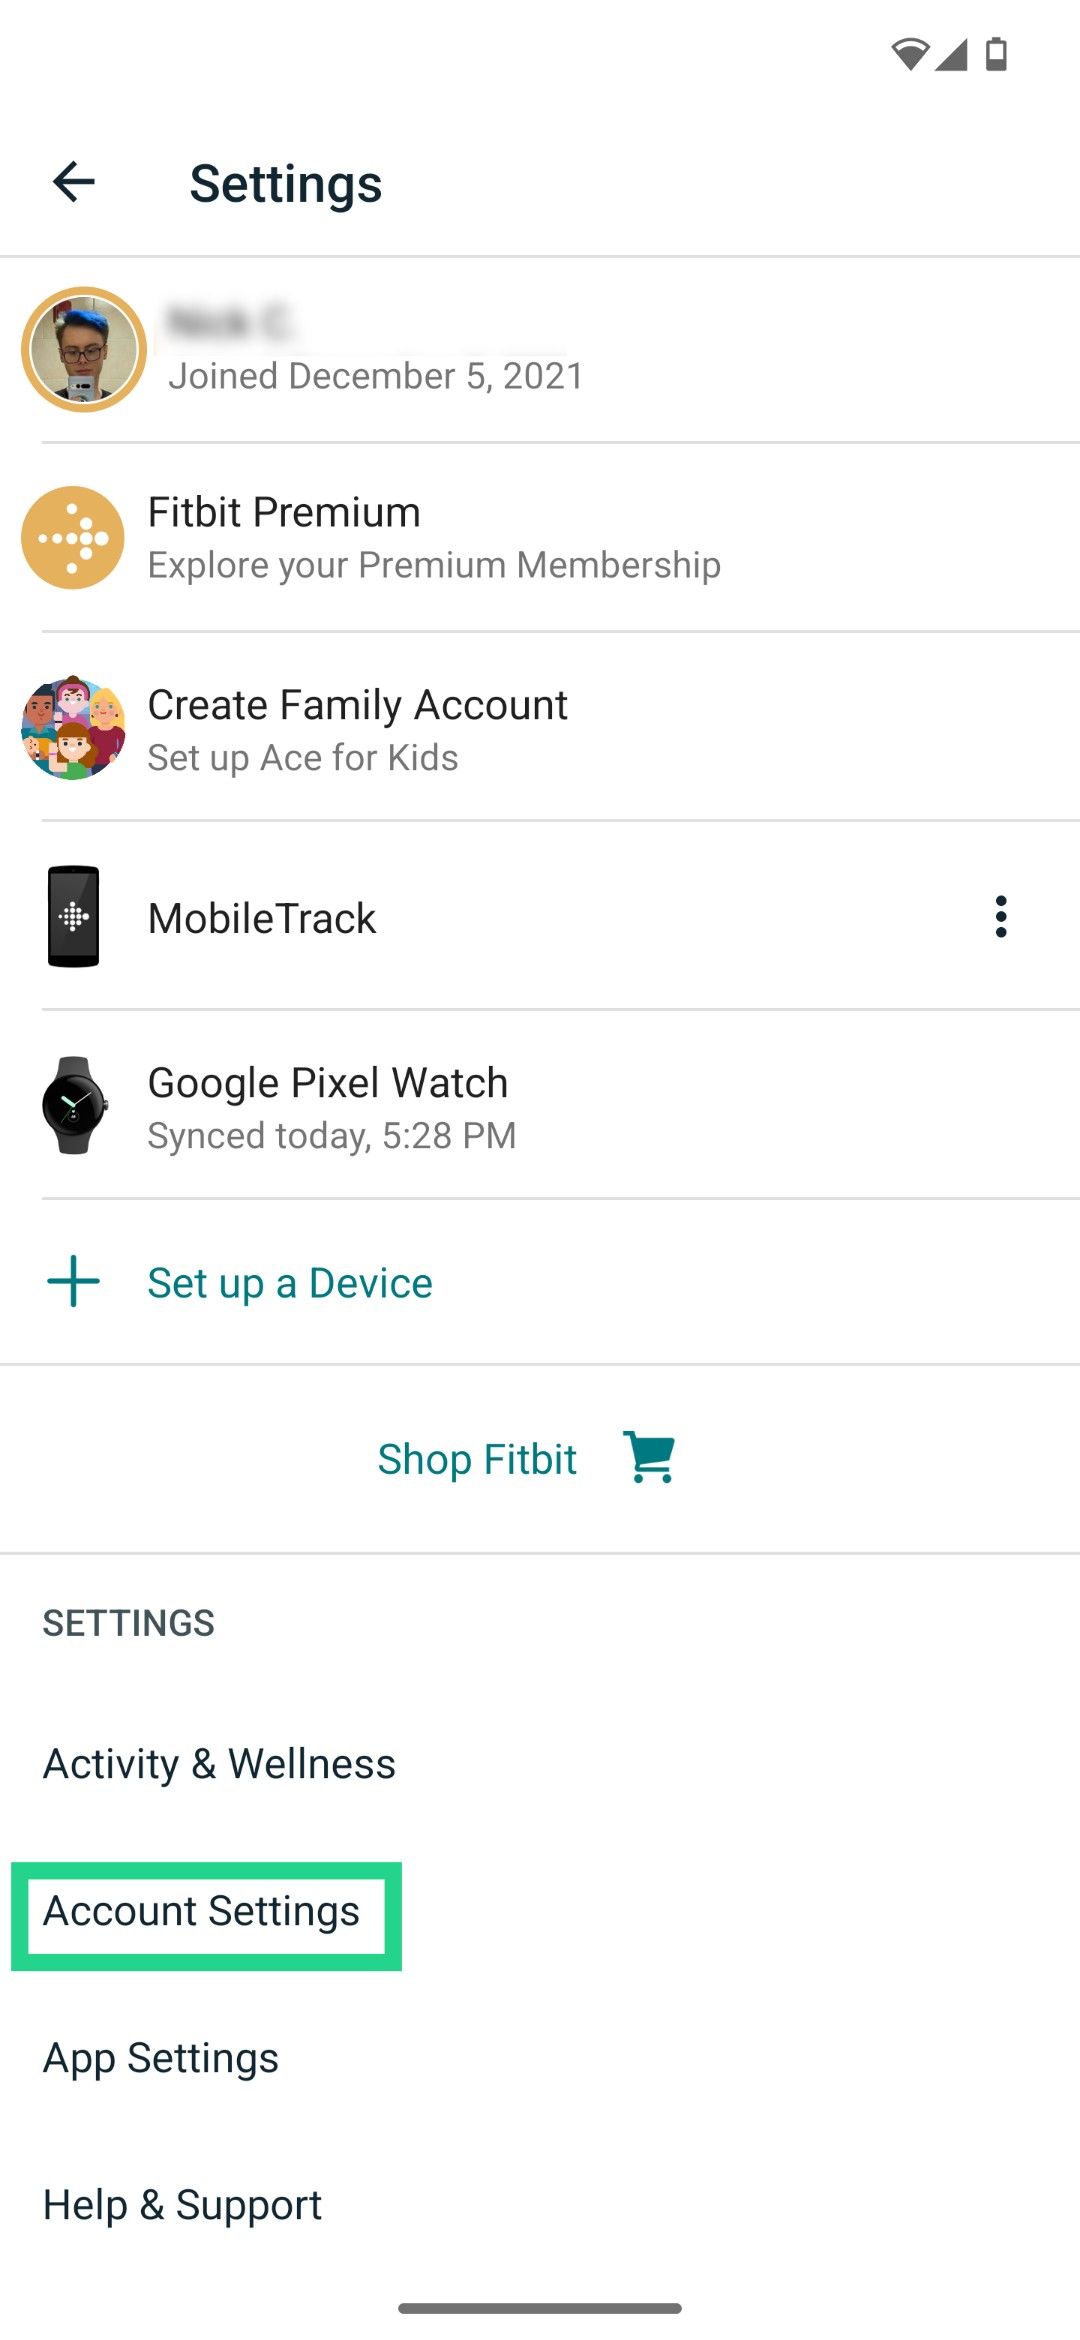 The Fitbit app's settings screen, with 'Account Settings' highlighted.